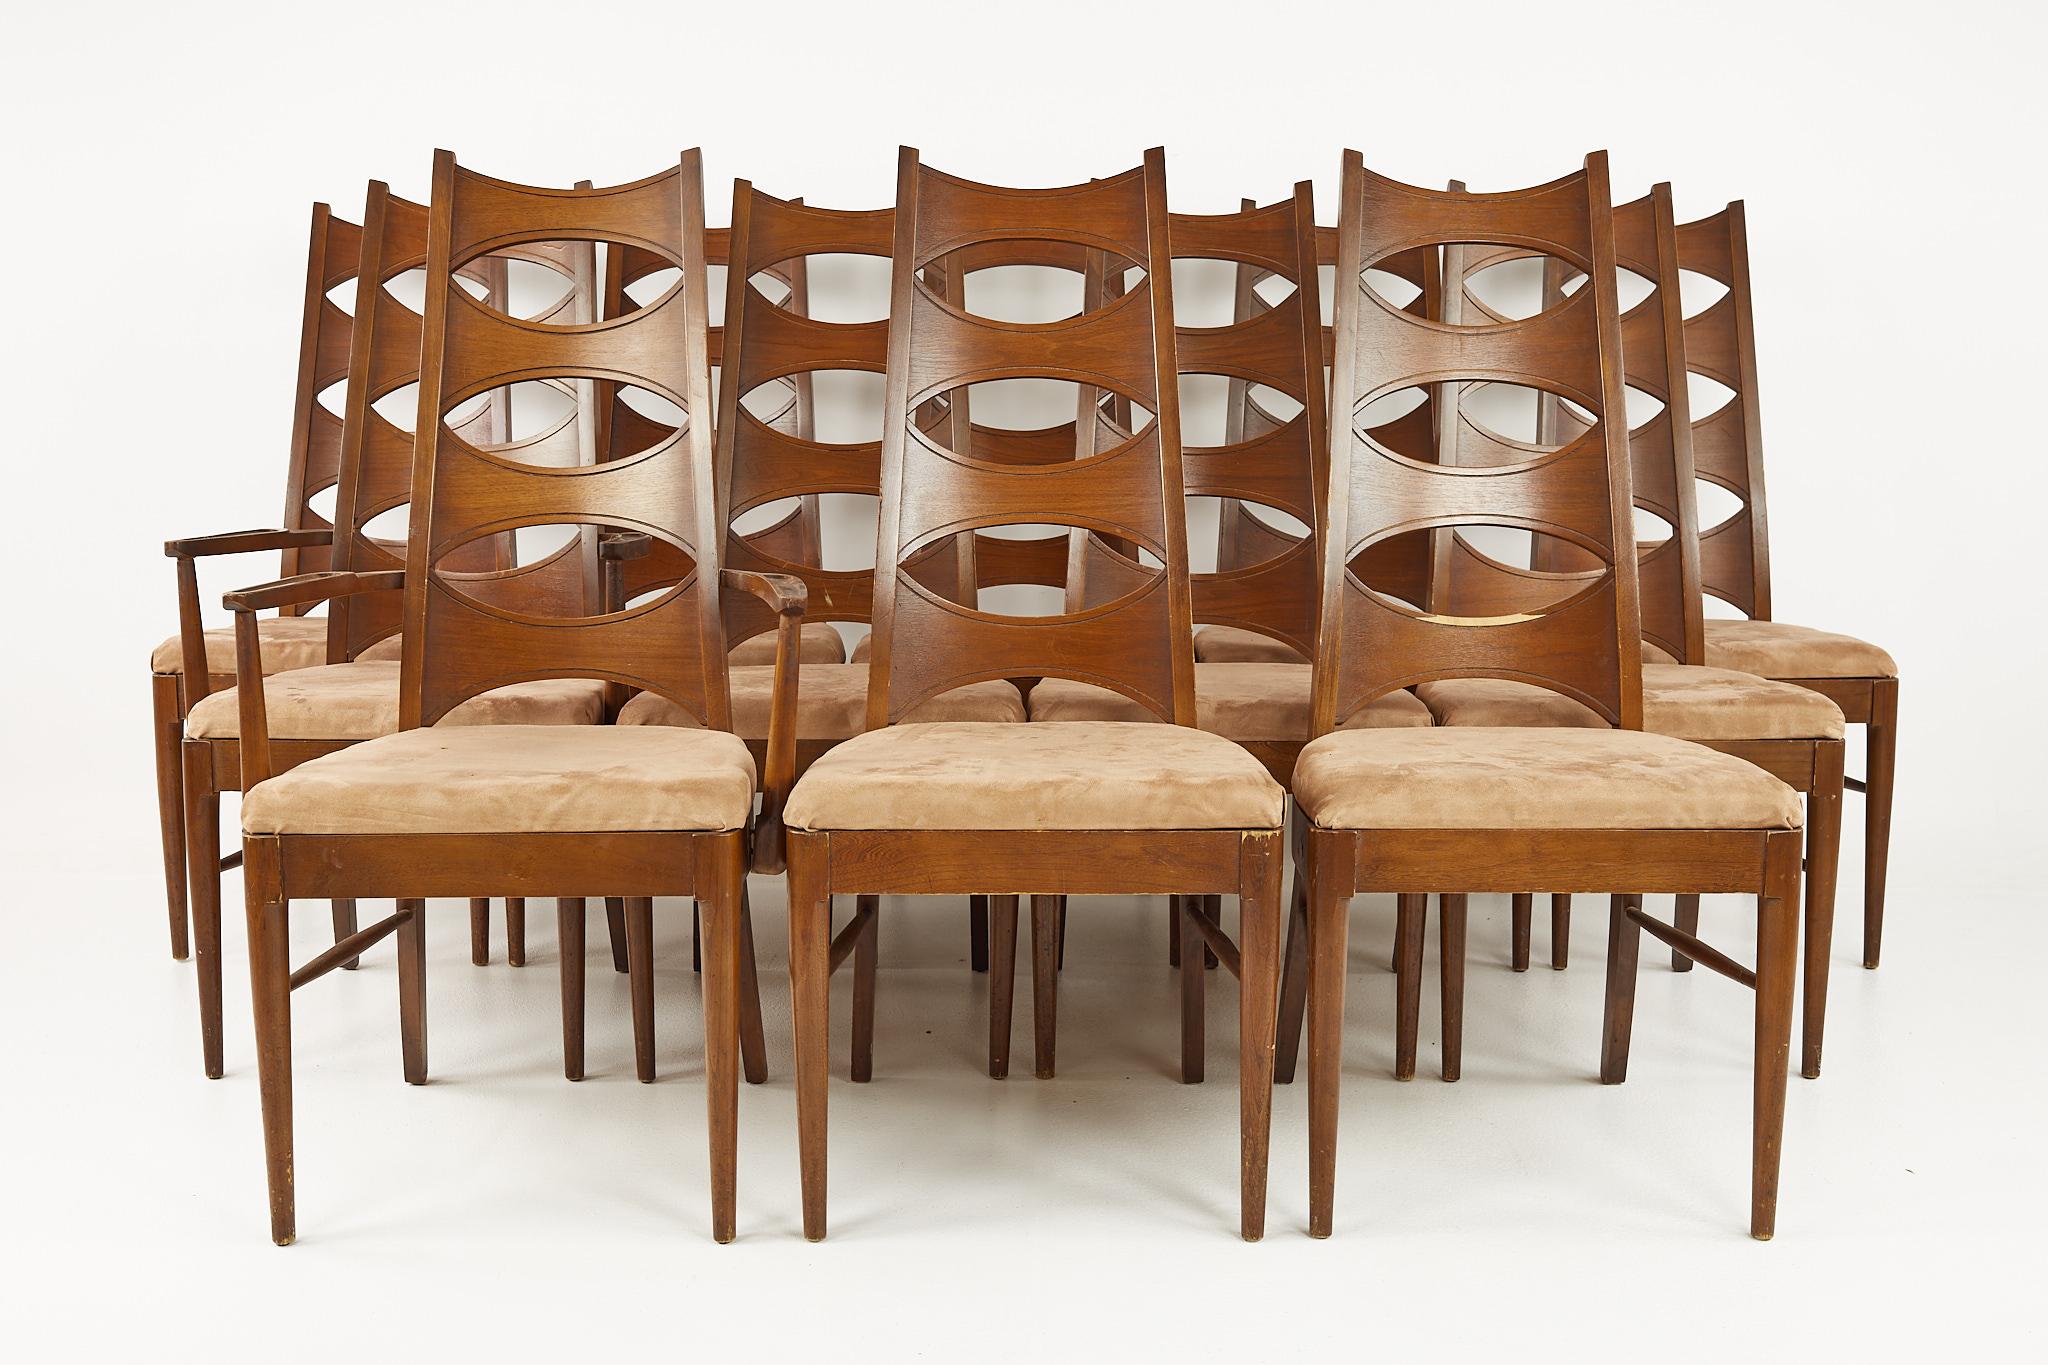 Kent Coffey Perspecta mid century cats eye walnut dining chairs - set of 12

Each chair measures: 19.5 wide x 18.5 deep x 45 inches high, with a seat height of 19 and arm height of 26 inches

Each captain chair measures 22.5 wide x 18.5 deep x